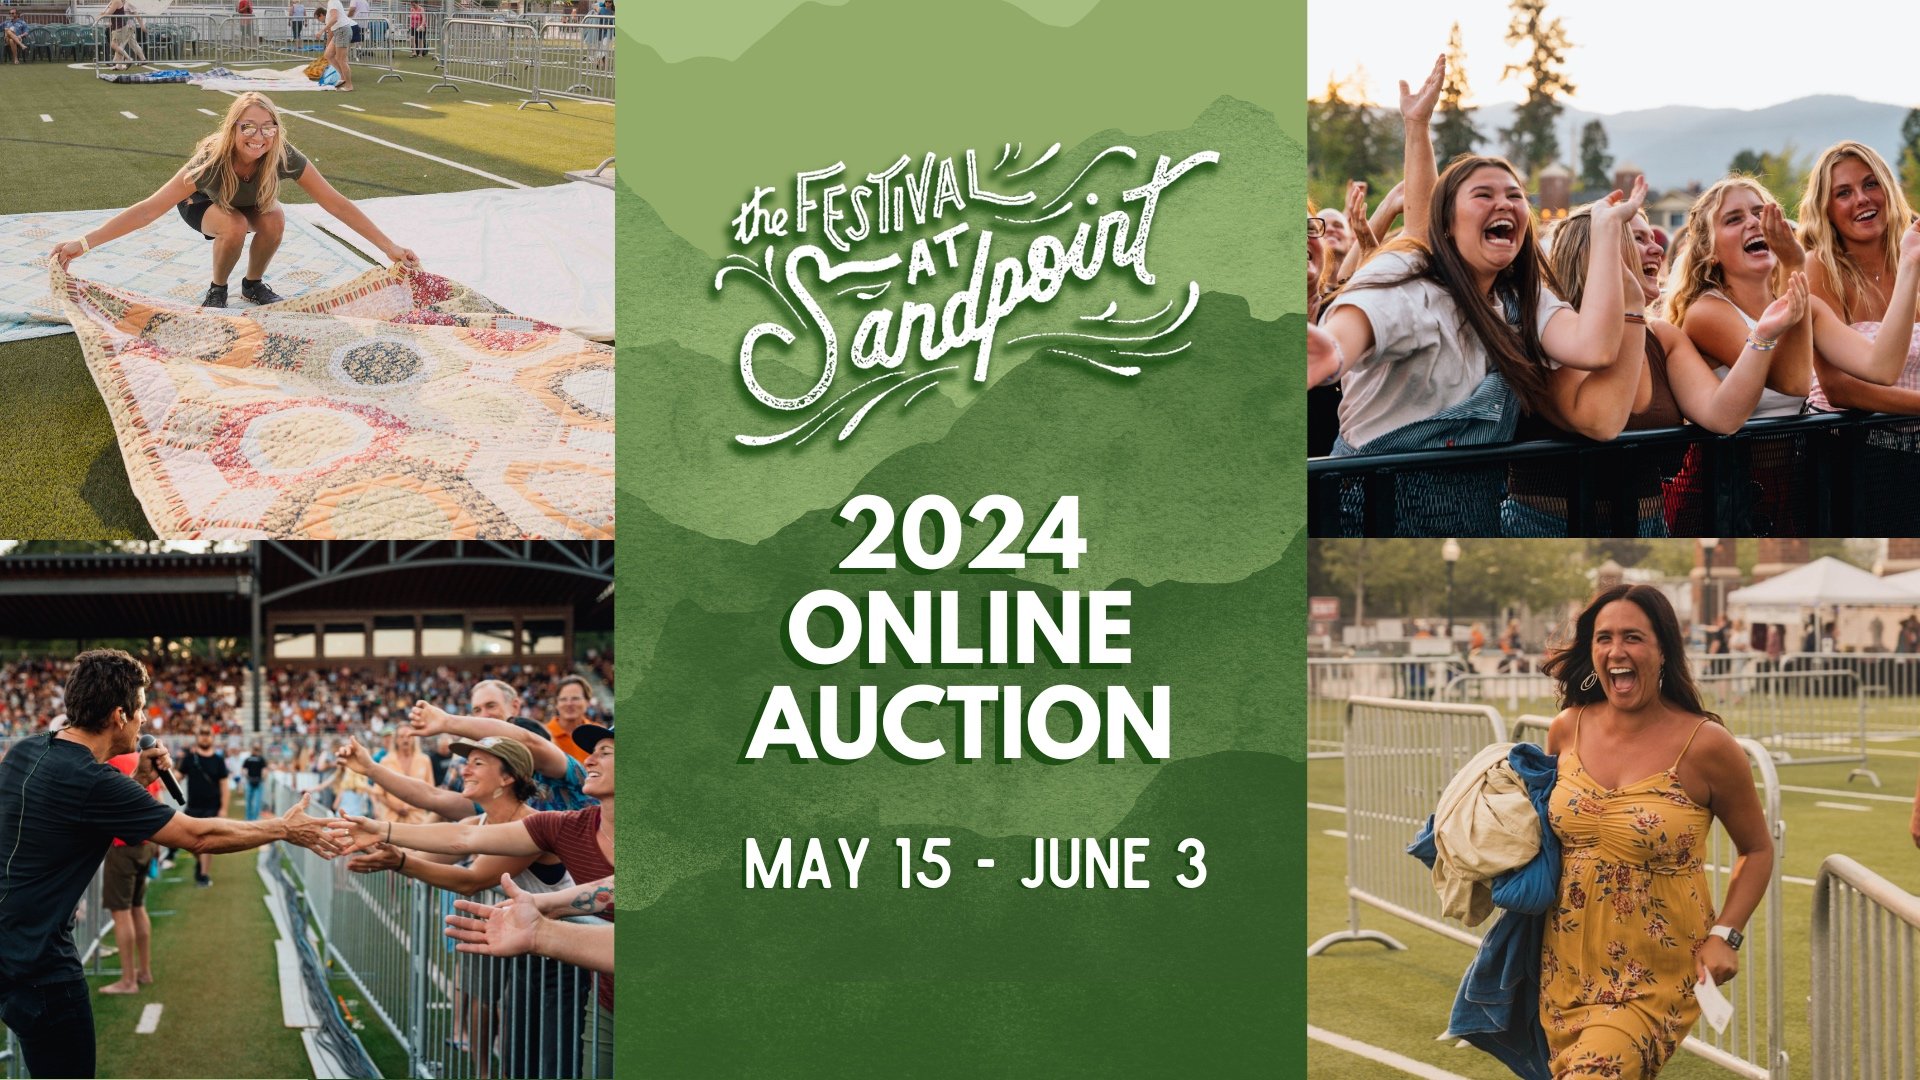 Looking for a VIP Festival at Sandpoint experience? Sick of searching for a parking spot every night of the Summer Series? Yearning for that perfect blanket location? 

The Festival at Sandpoint&rsquo;s 2024 Online Auction is the only place where you